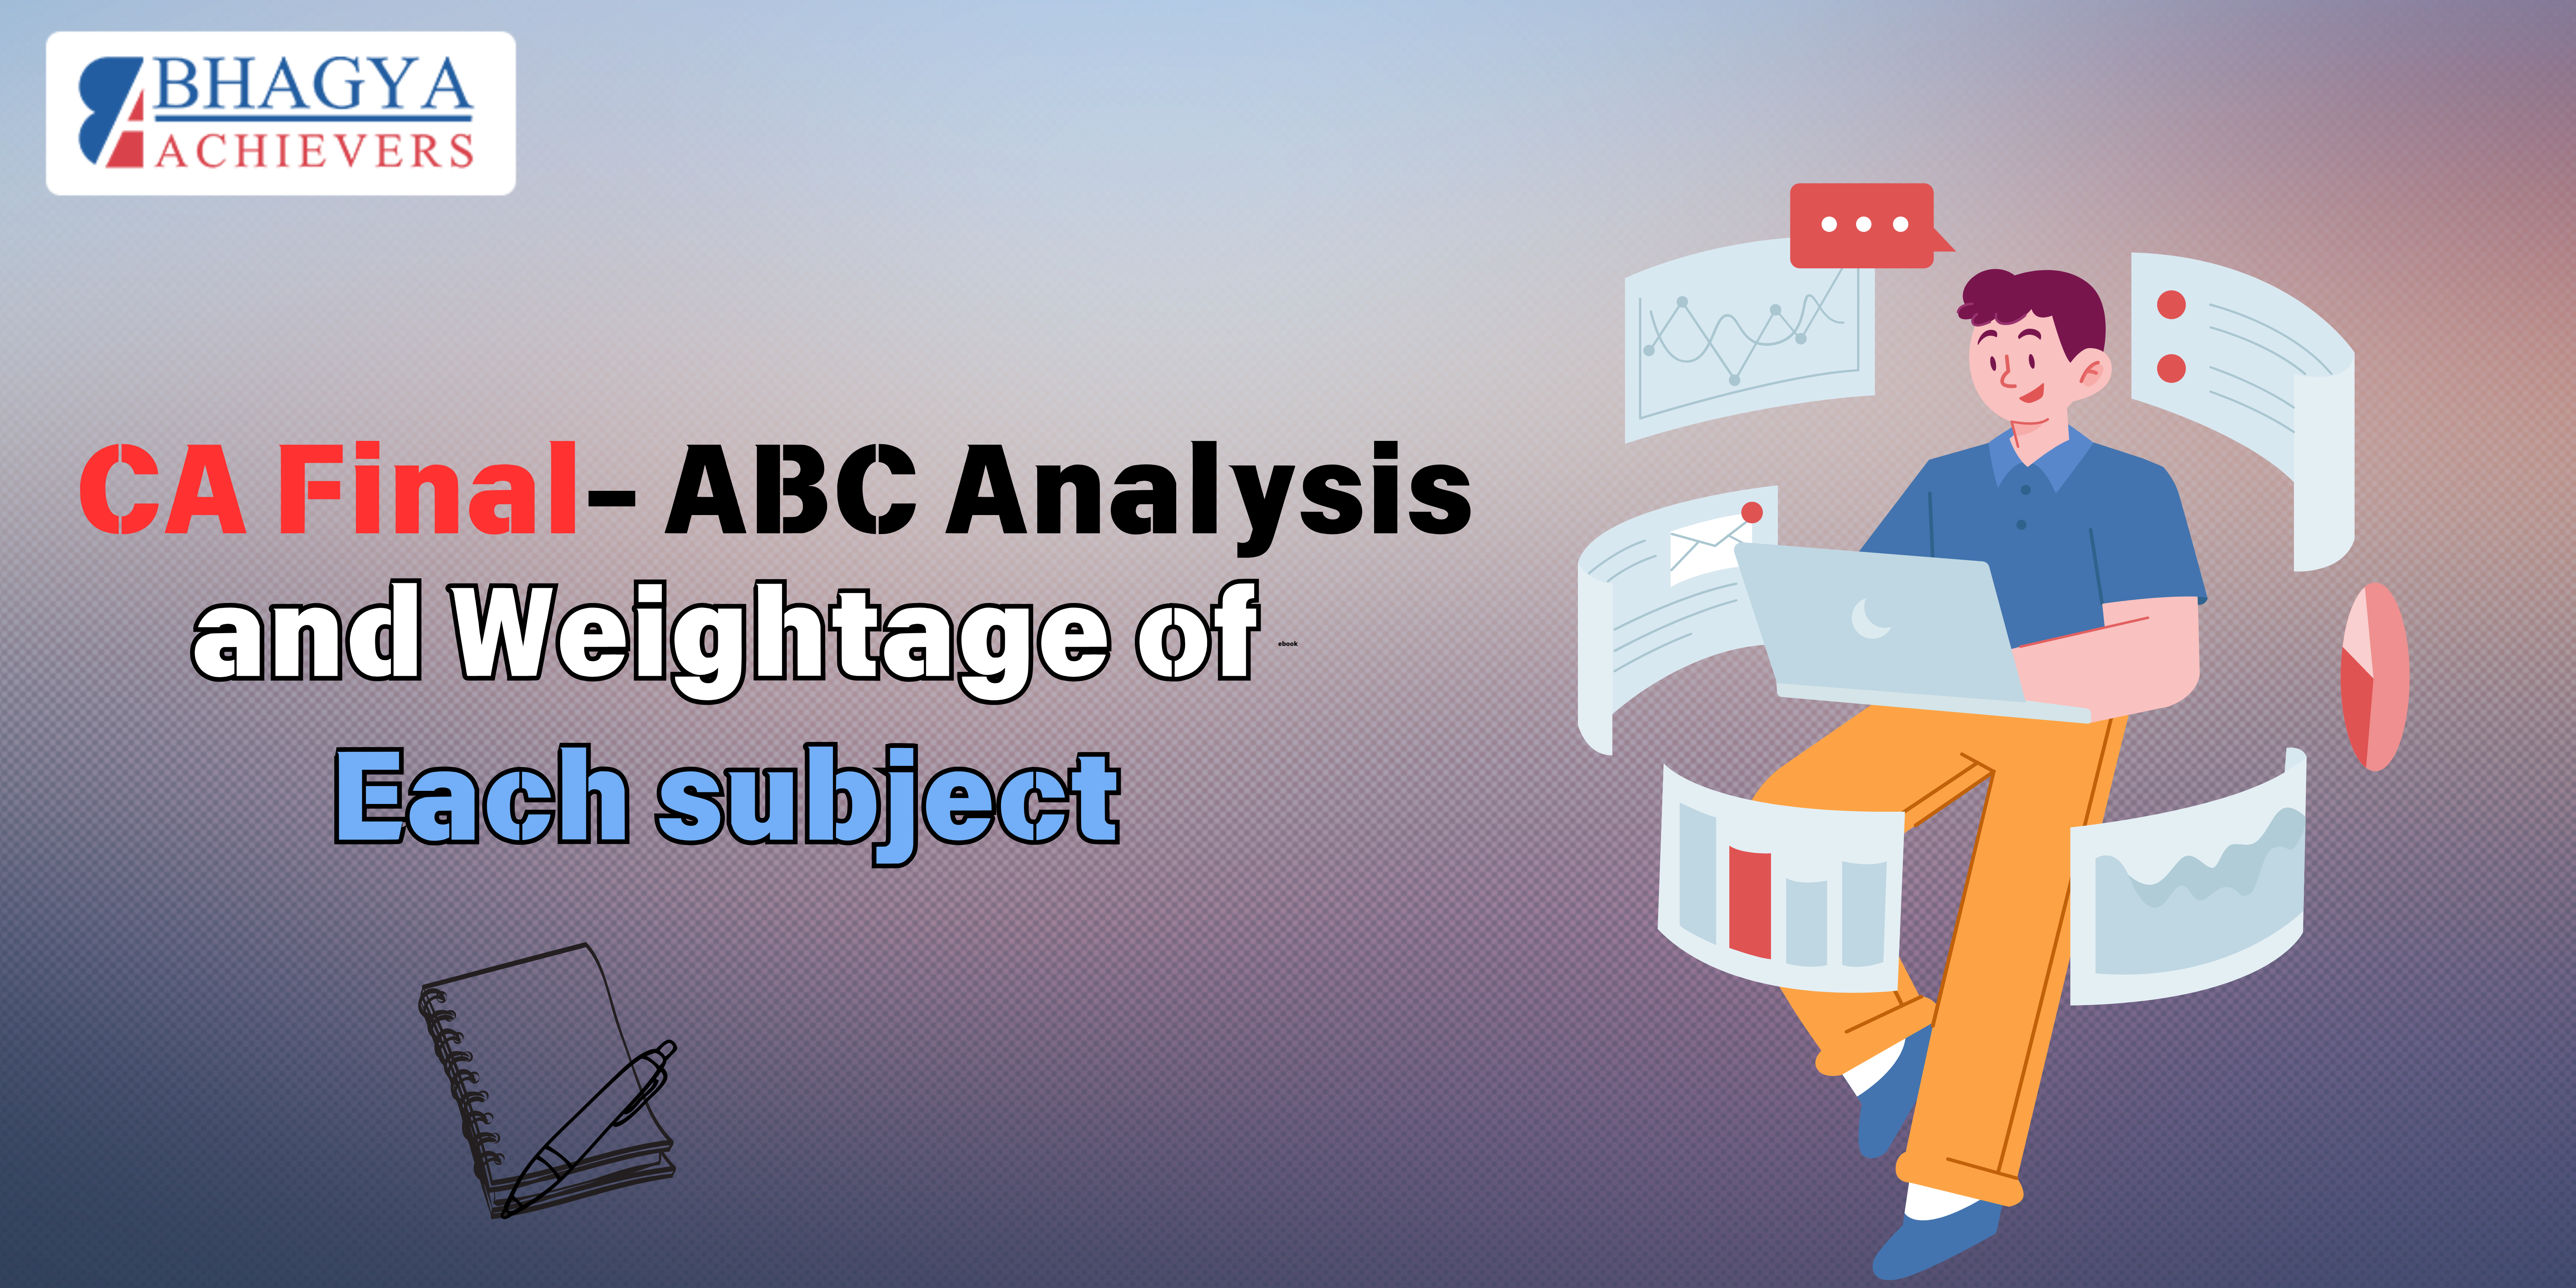 CA Final - ABC Analysis and Weightage of Each subject - Bhagya Achievers